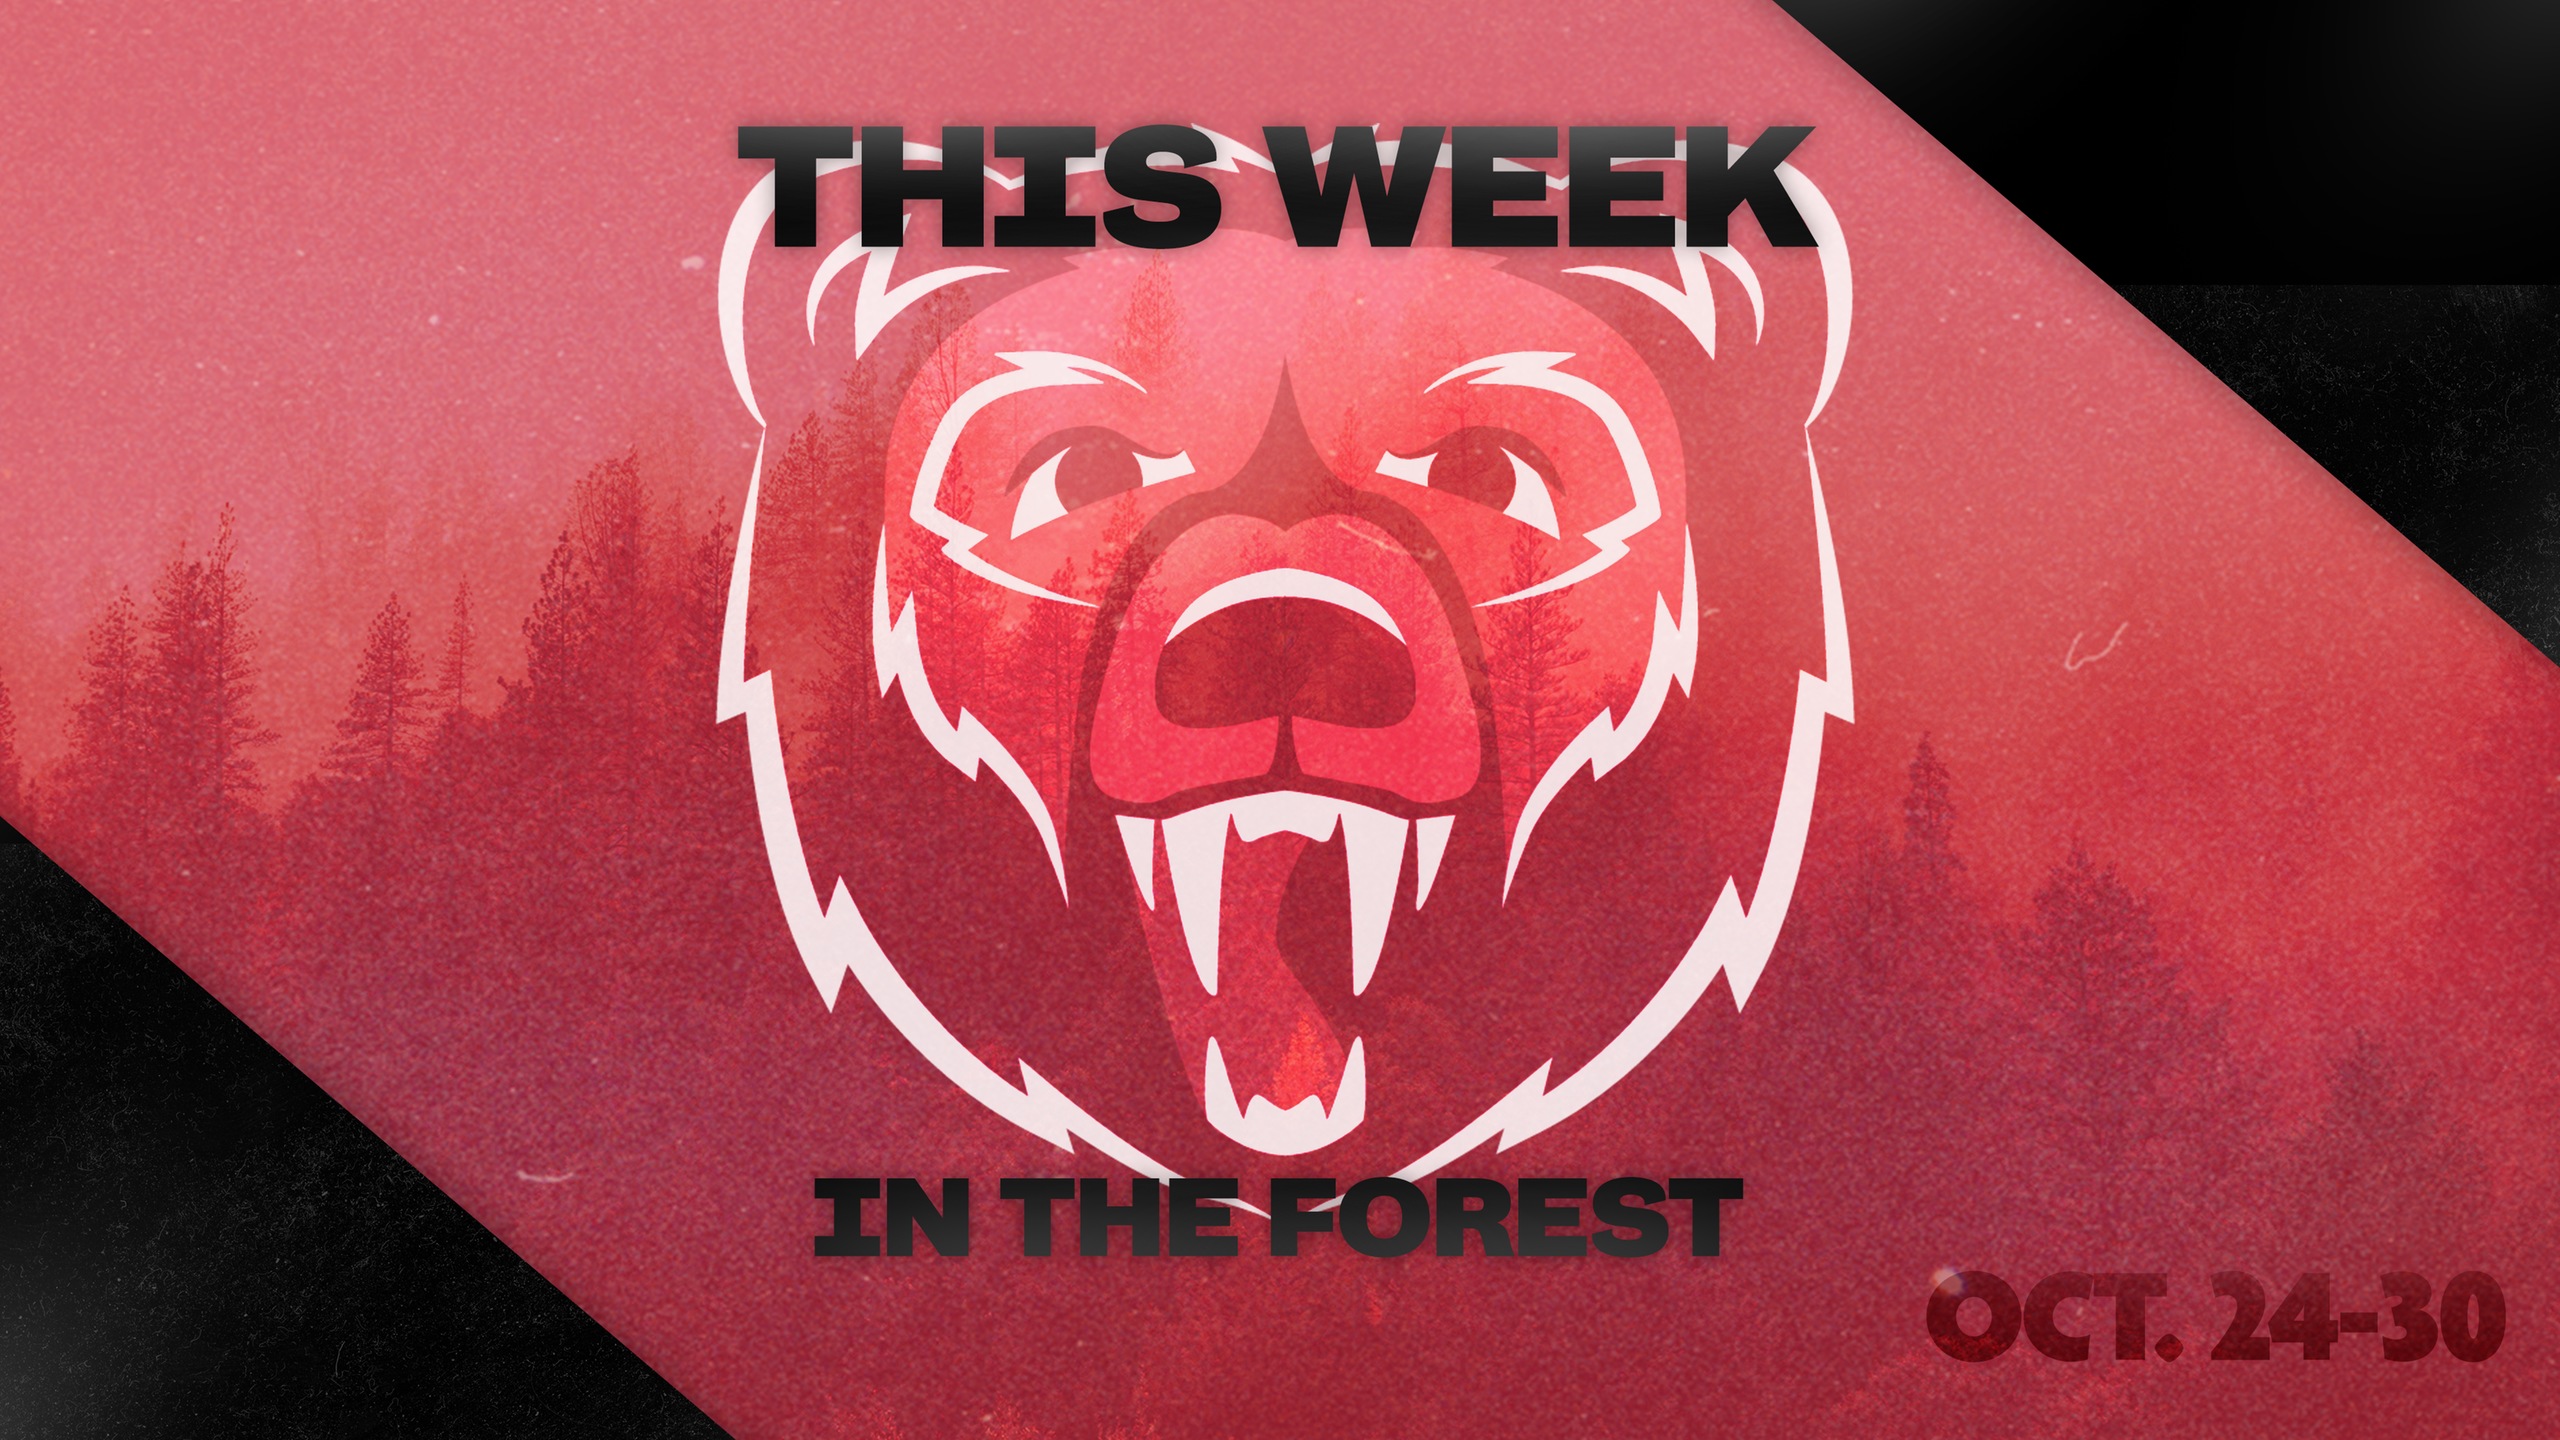 This Week in The Forest Oct. 24-30